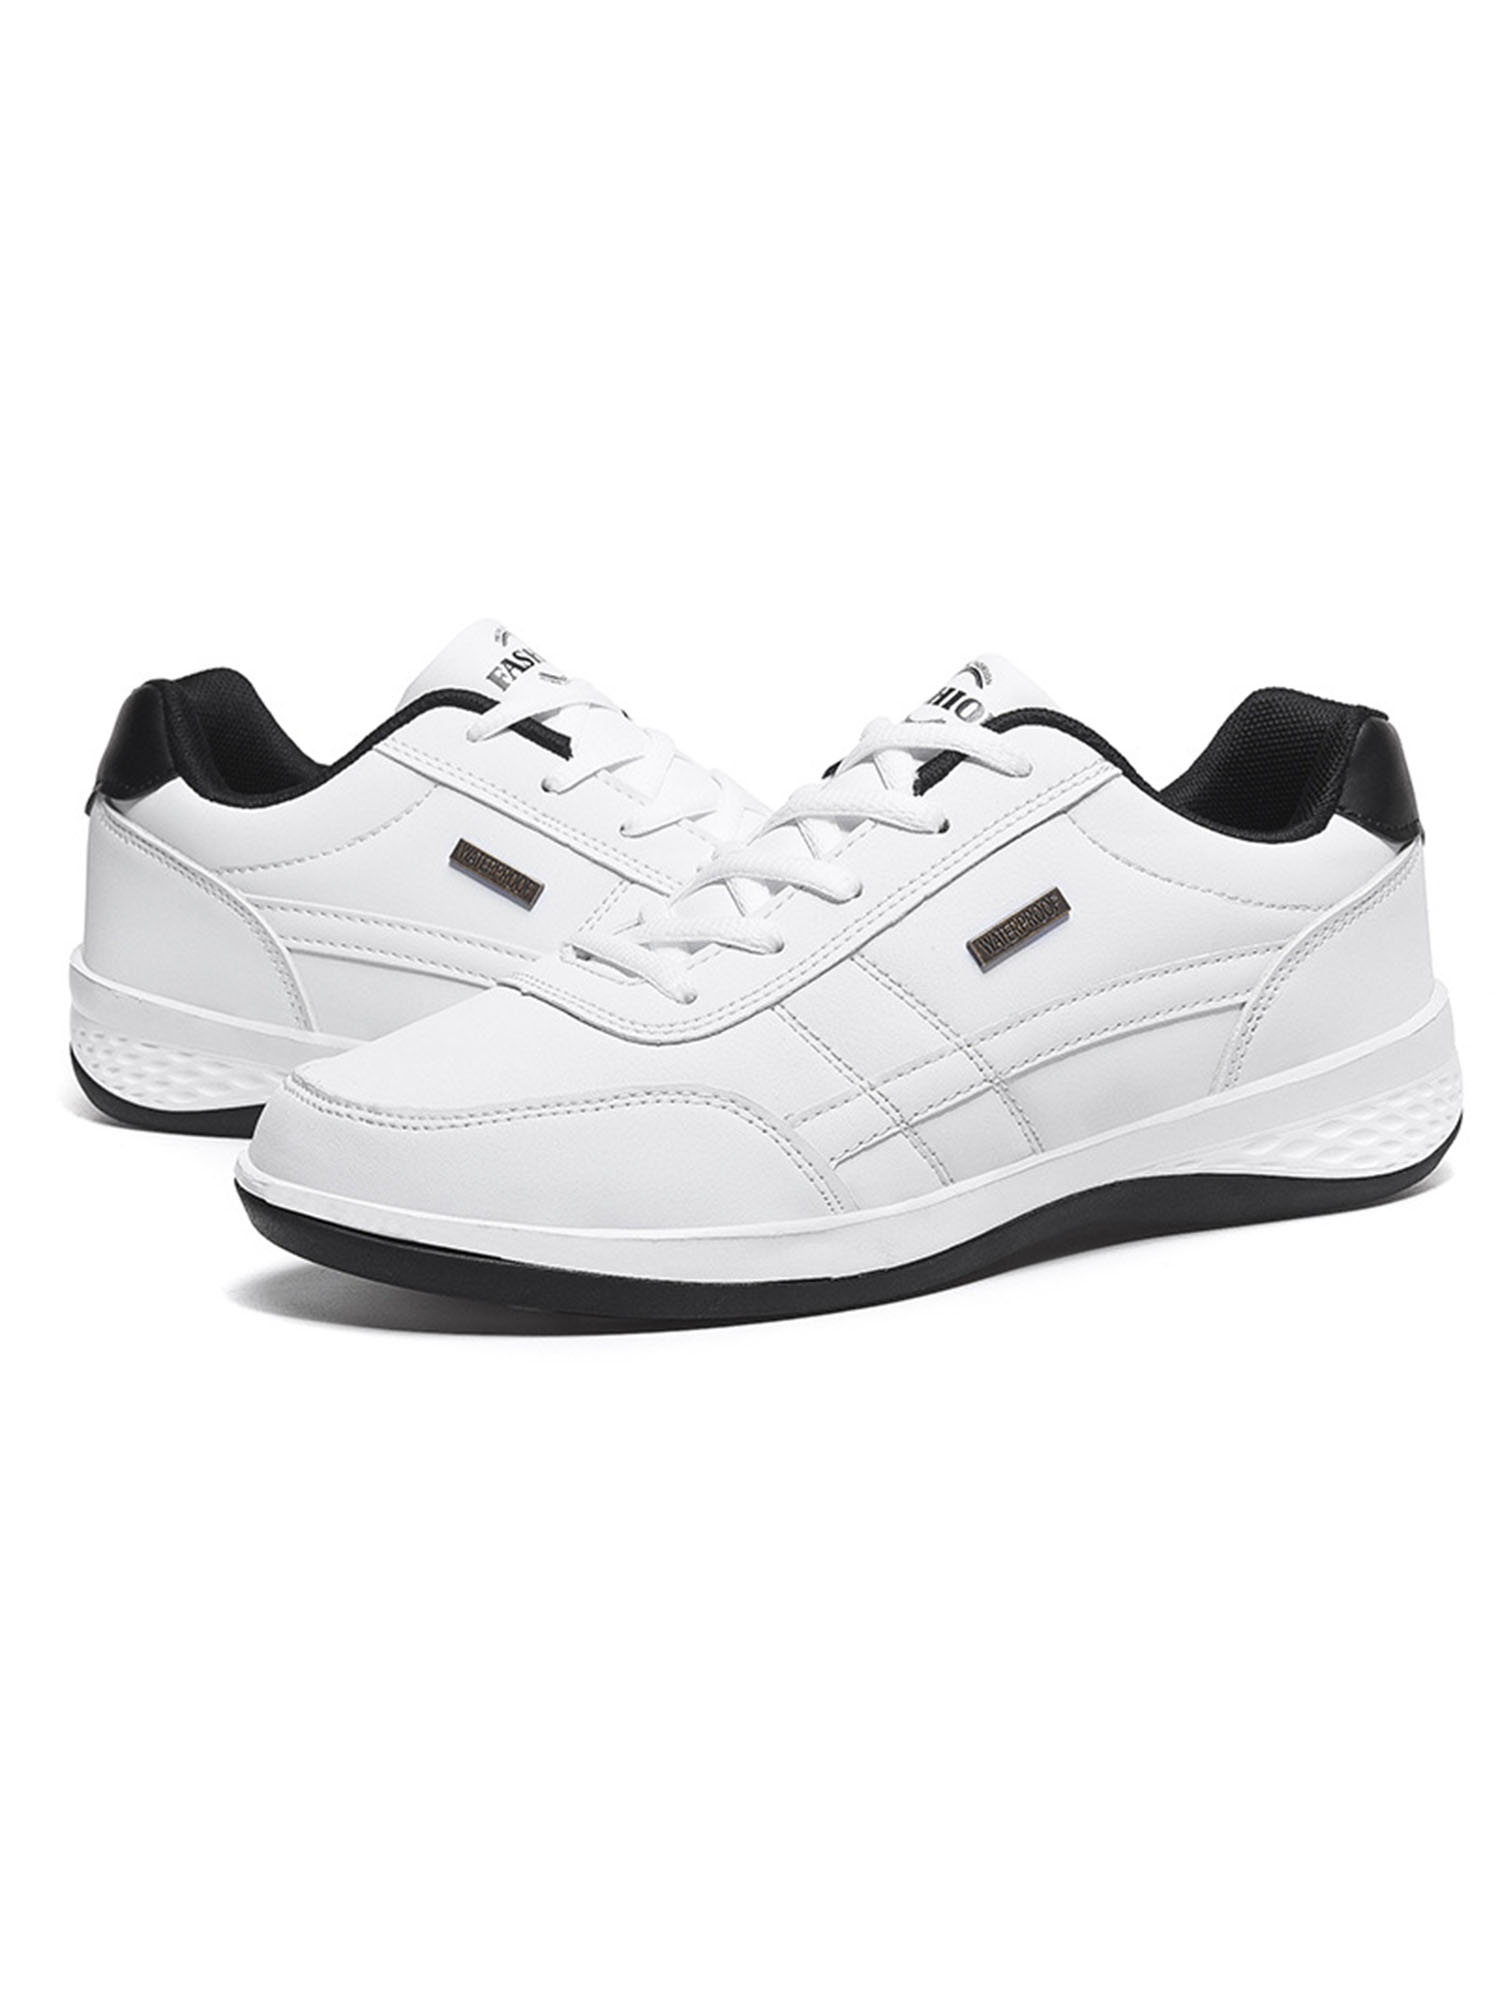 Avamo Casual Sneakers Men's Athletic Running Trainers Sports Tennis Fitness Shoes Gym White US 12 1 Pair - image 5 of 5